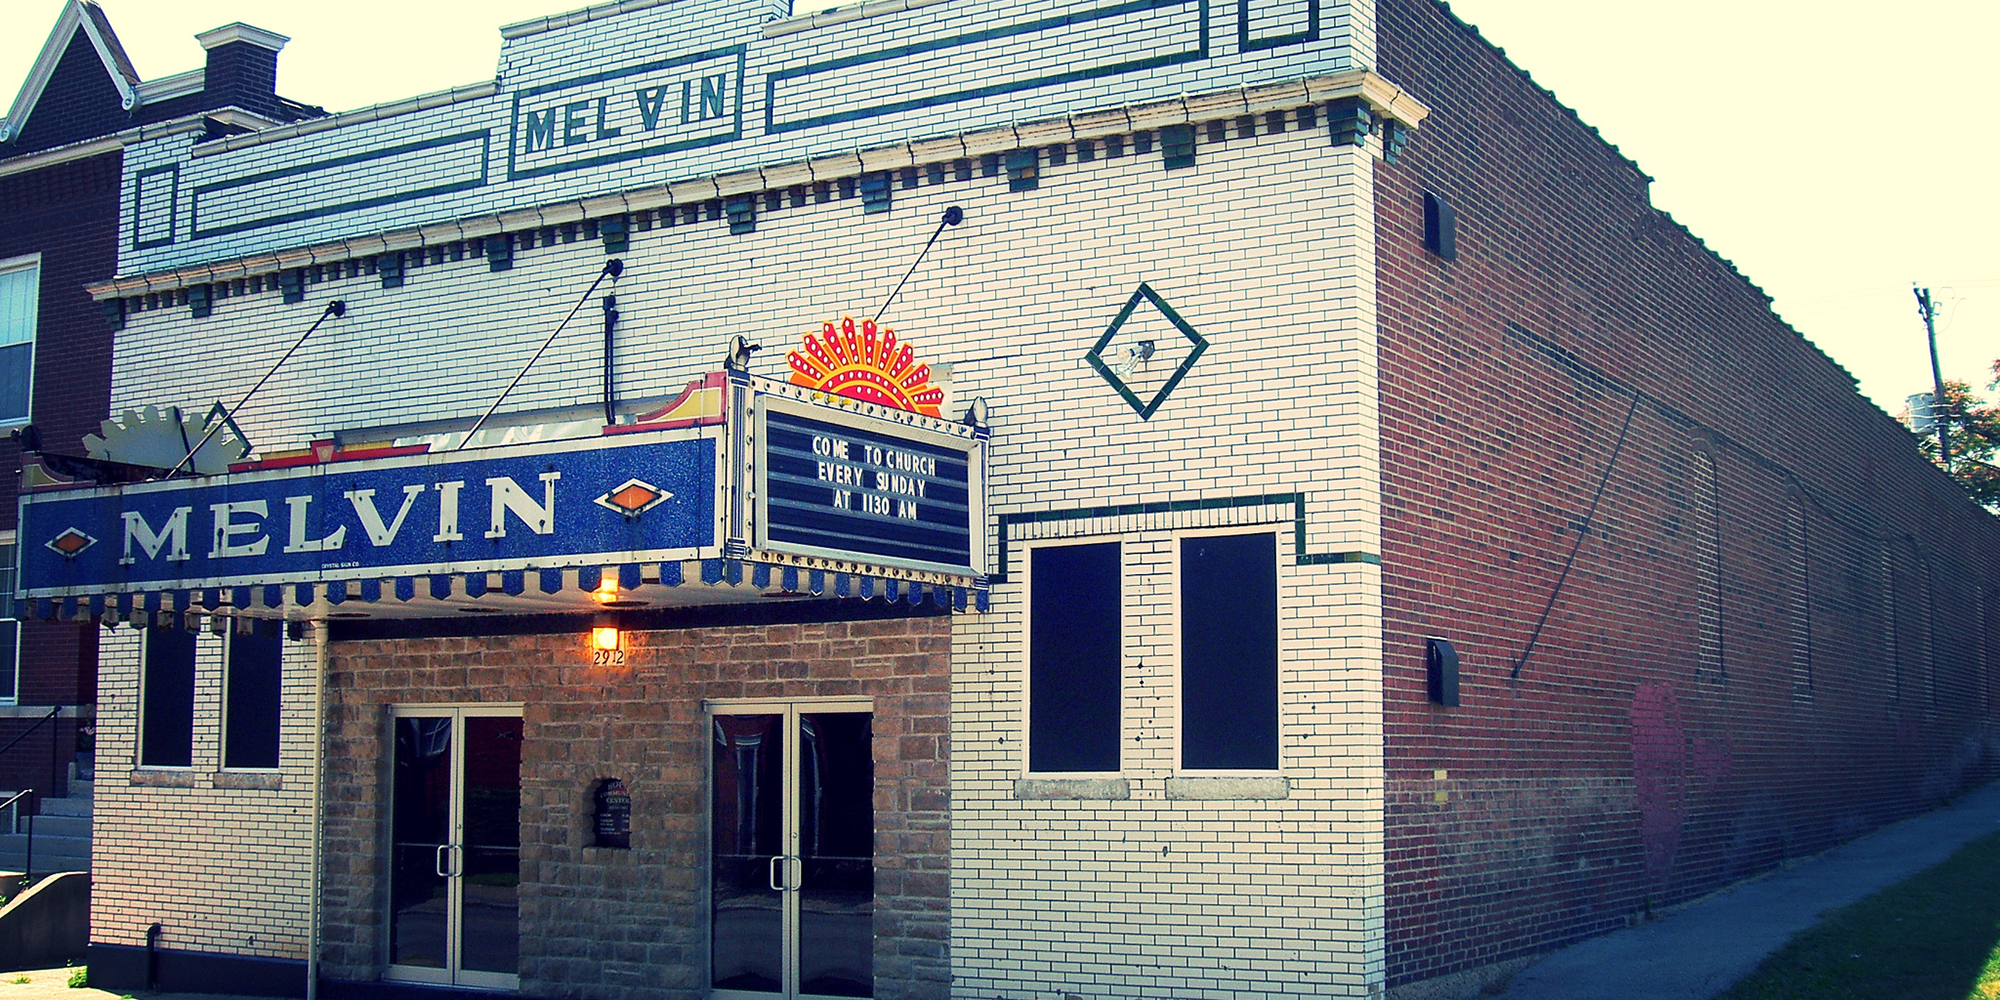 The former Melvin Theater on Chippewa Street in Dutchtown, St. Louis. Photo by Tom Lampe.